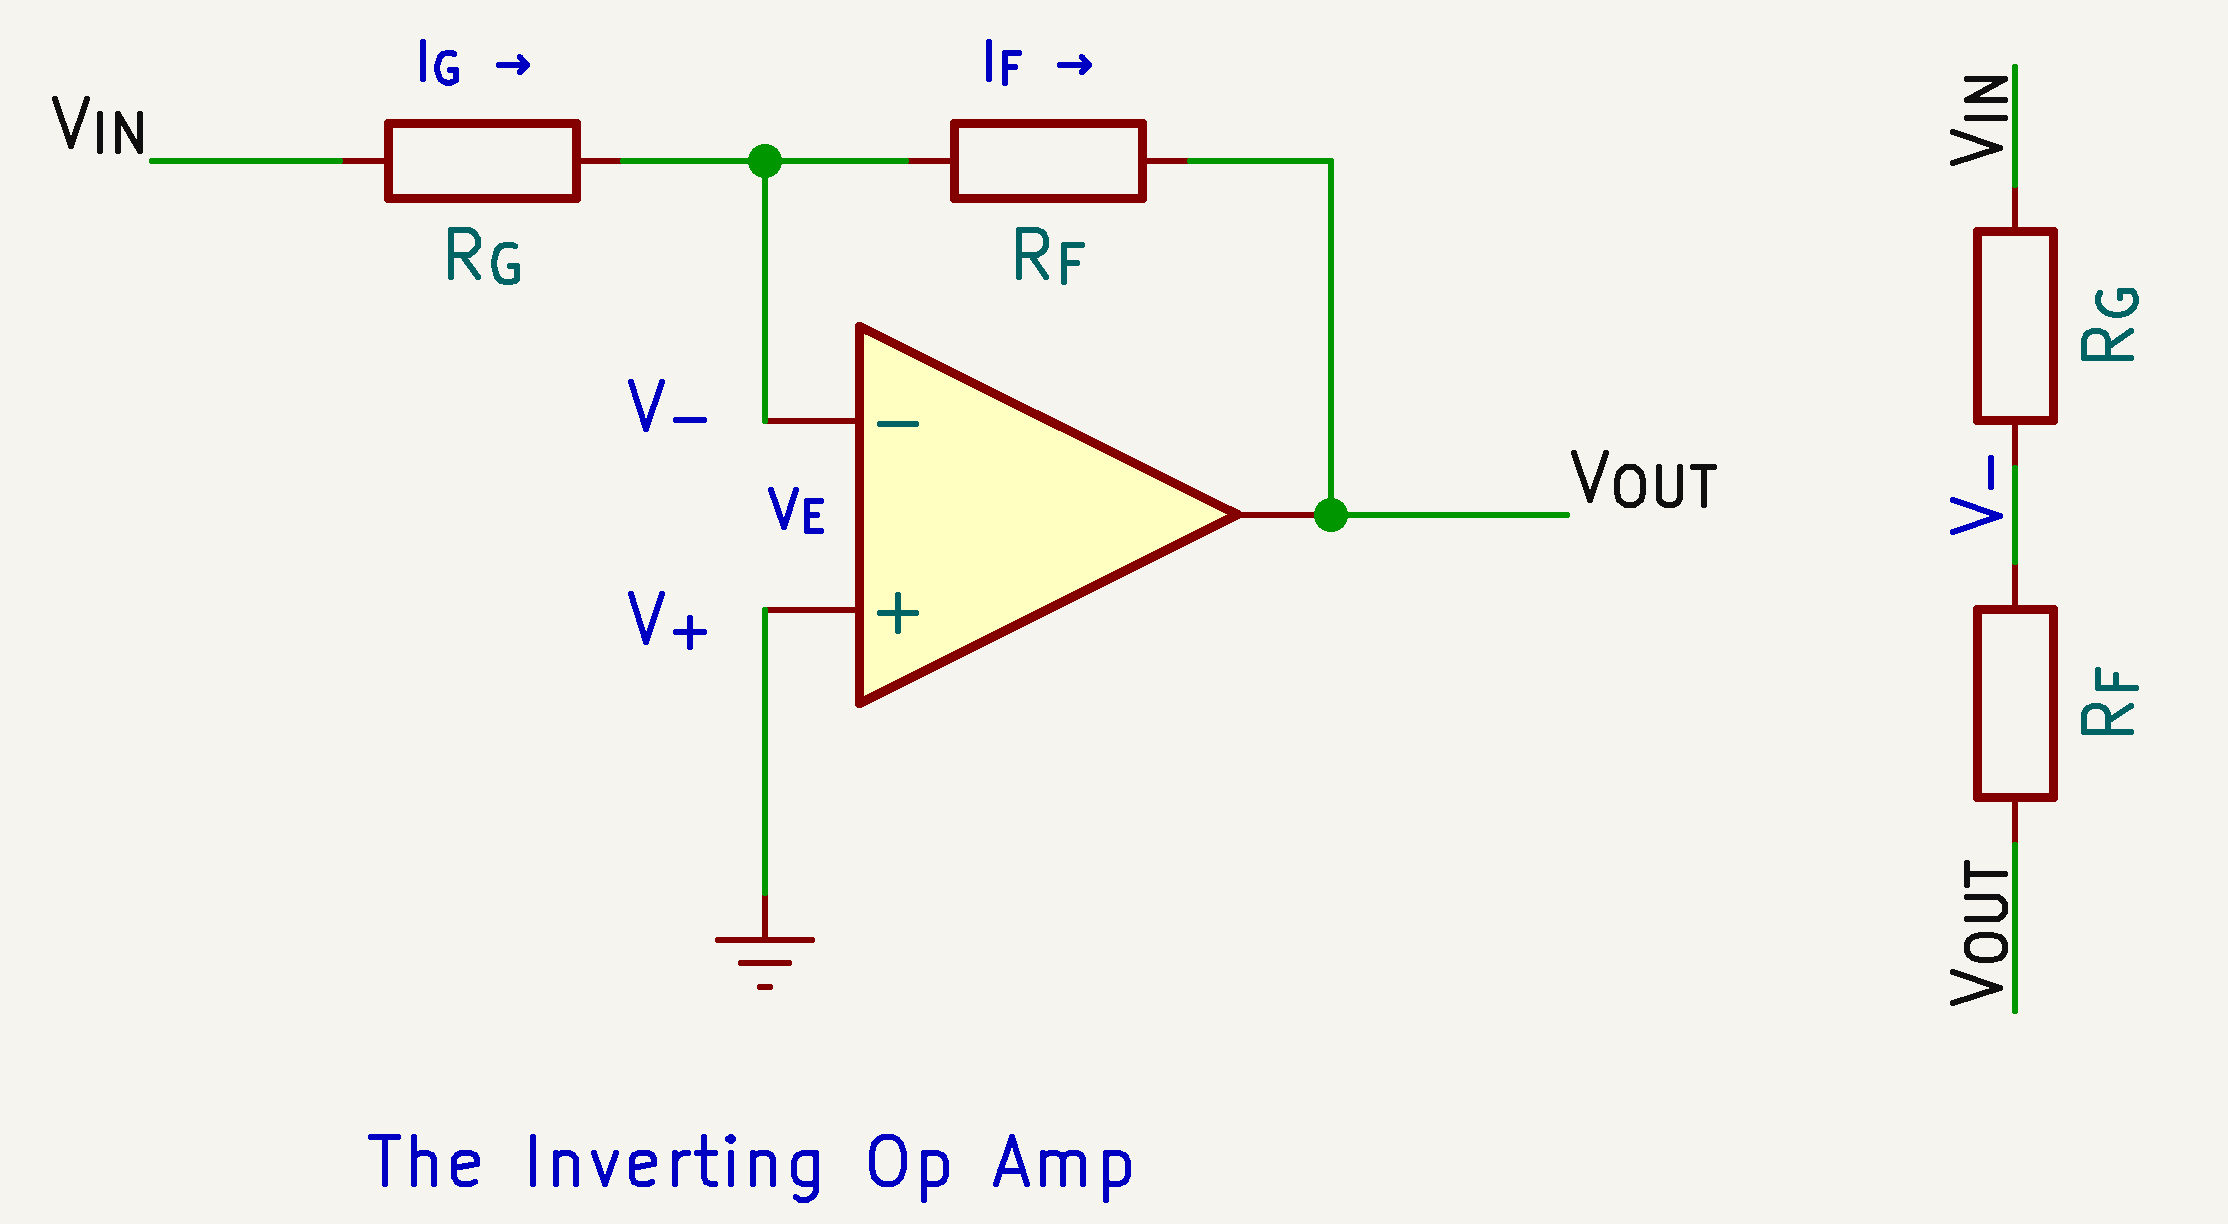 The Inverting Op Amp